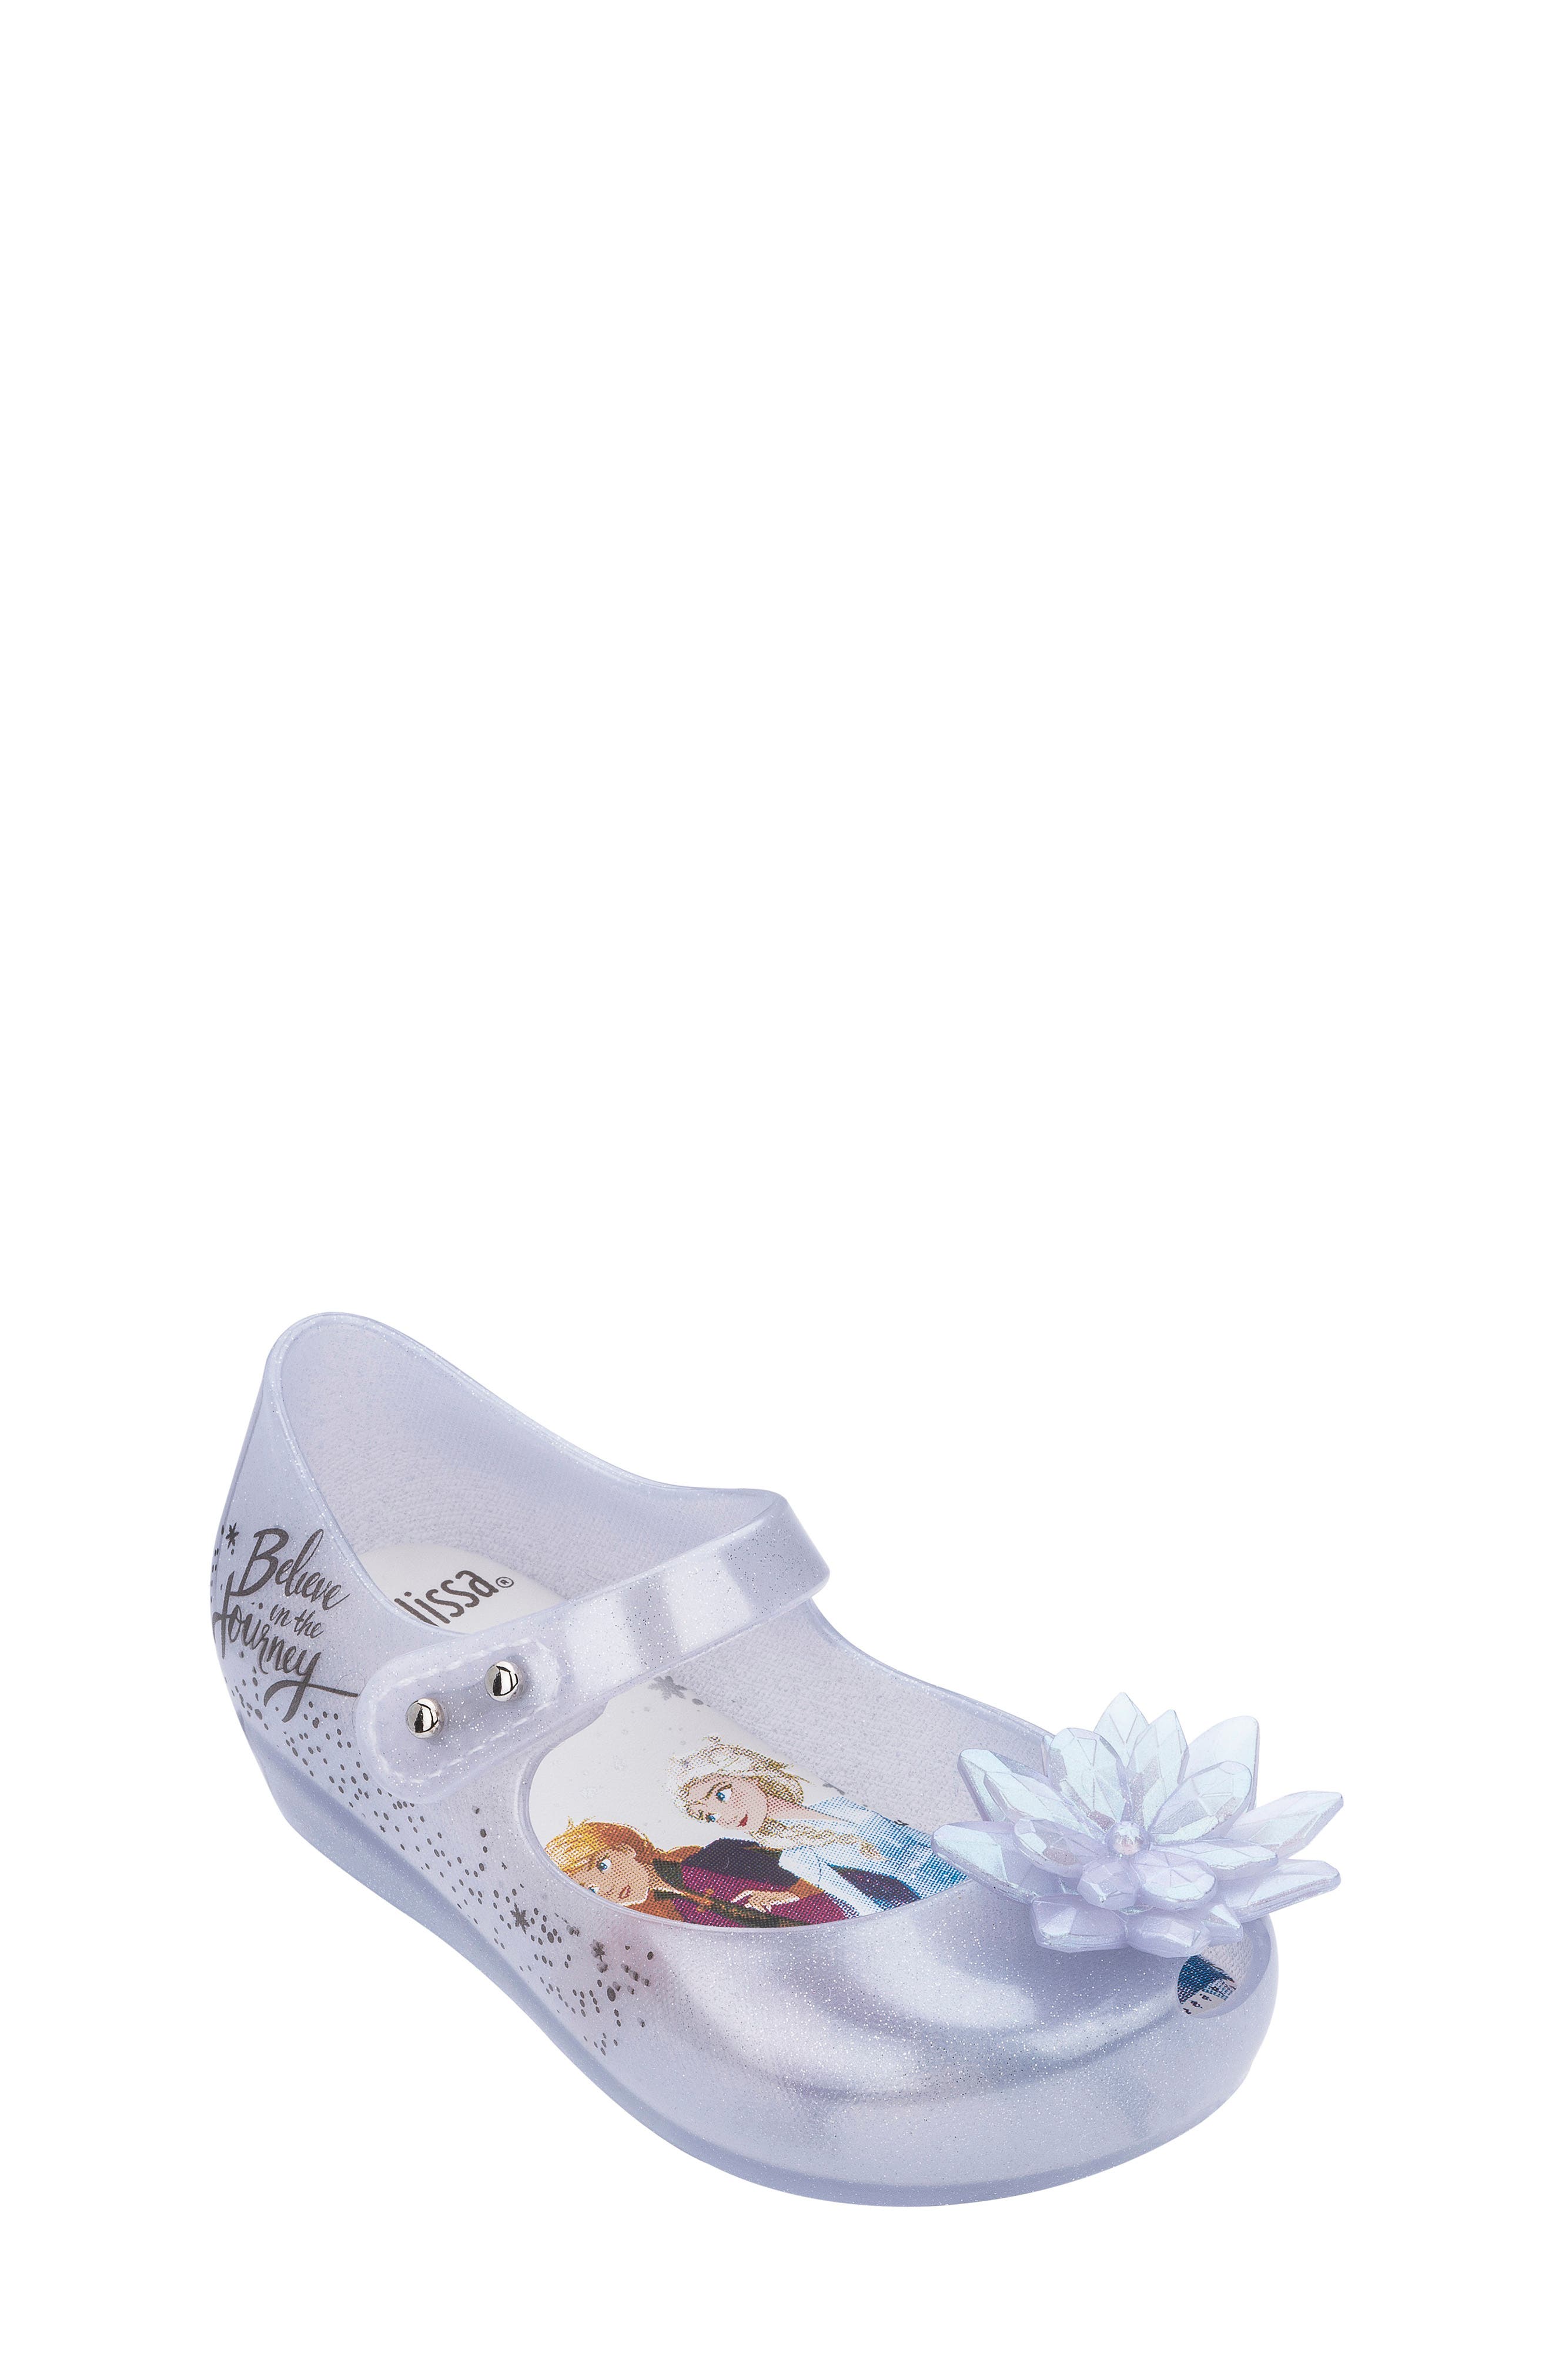 melissa jelly shoes 23